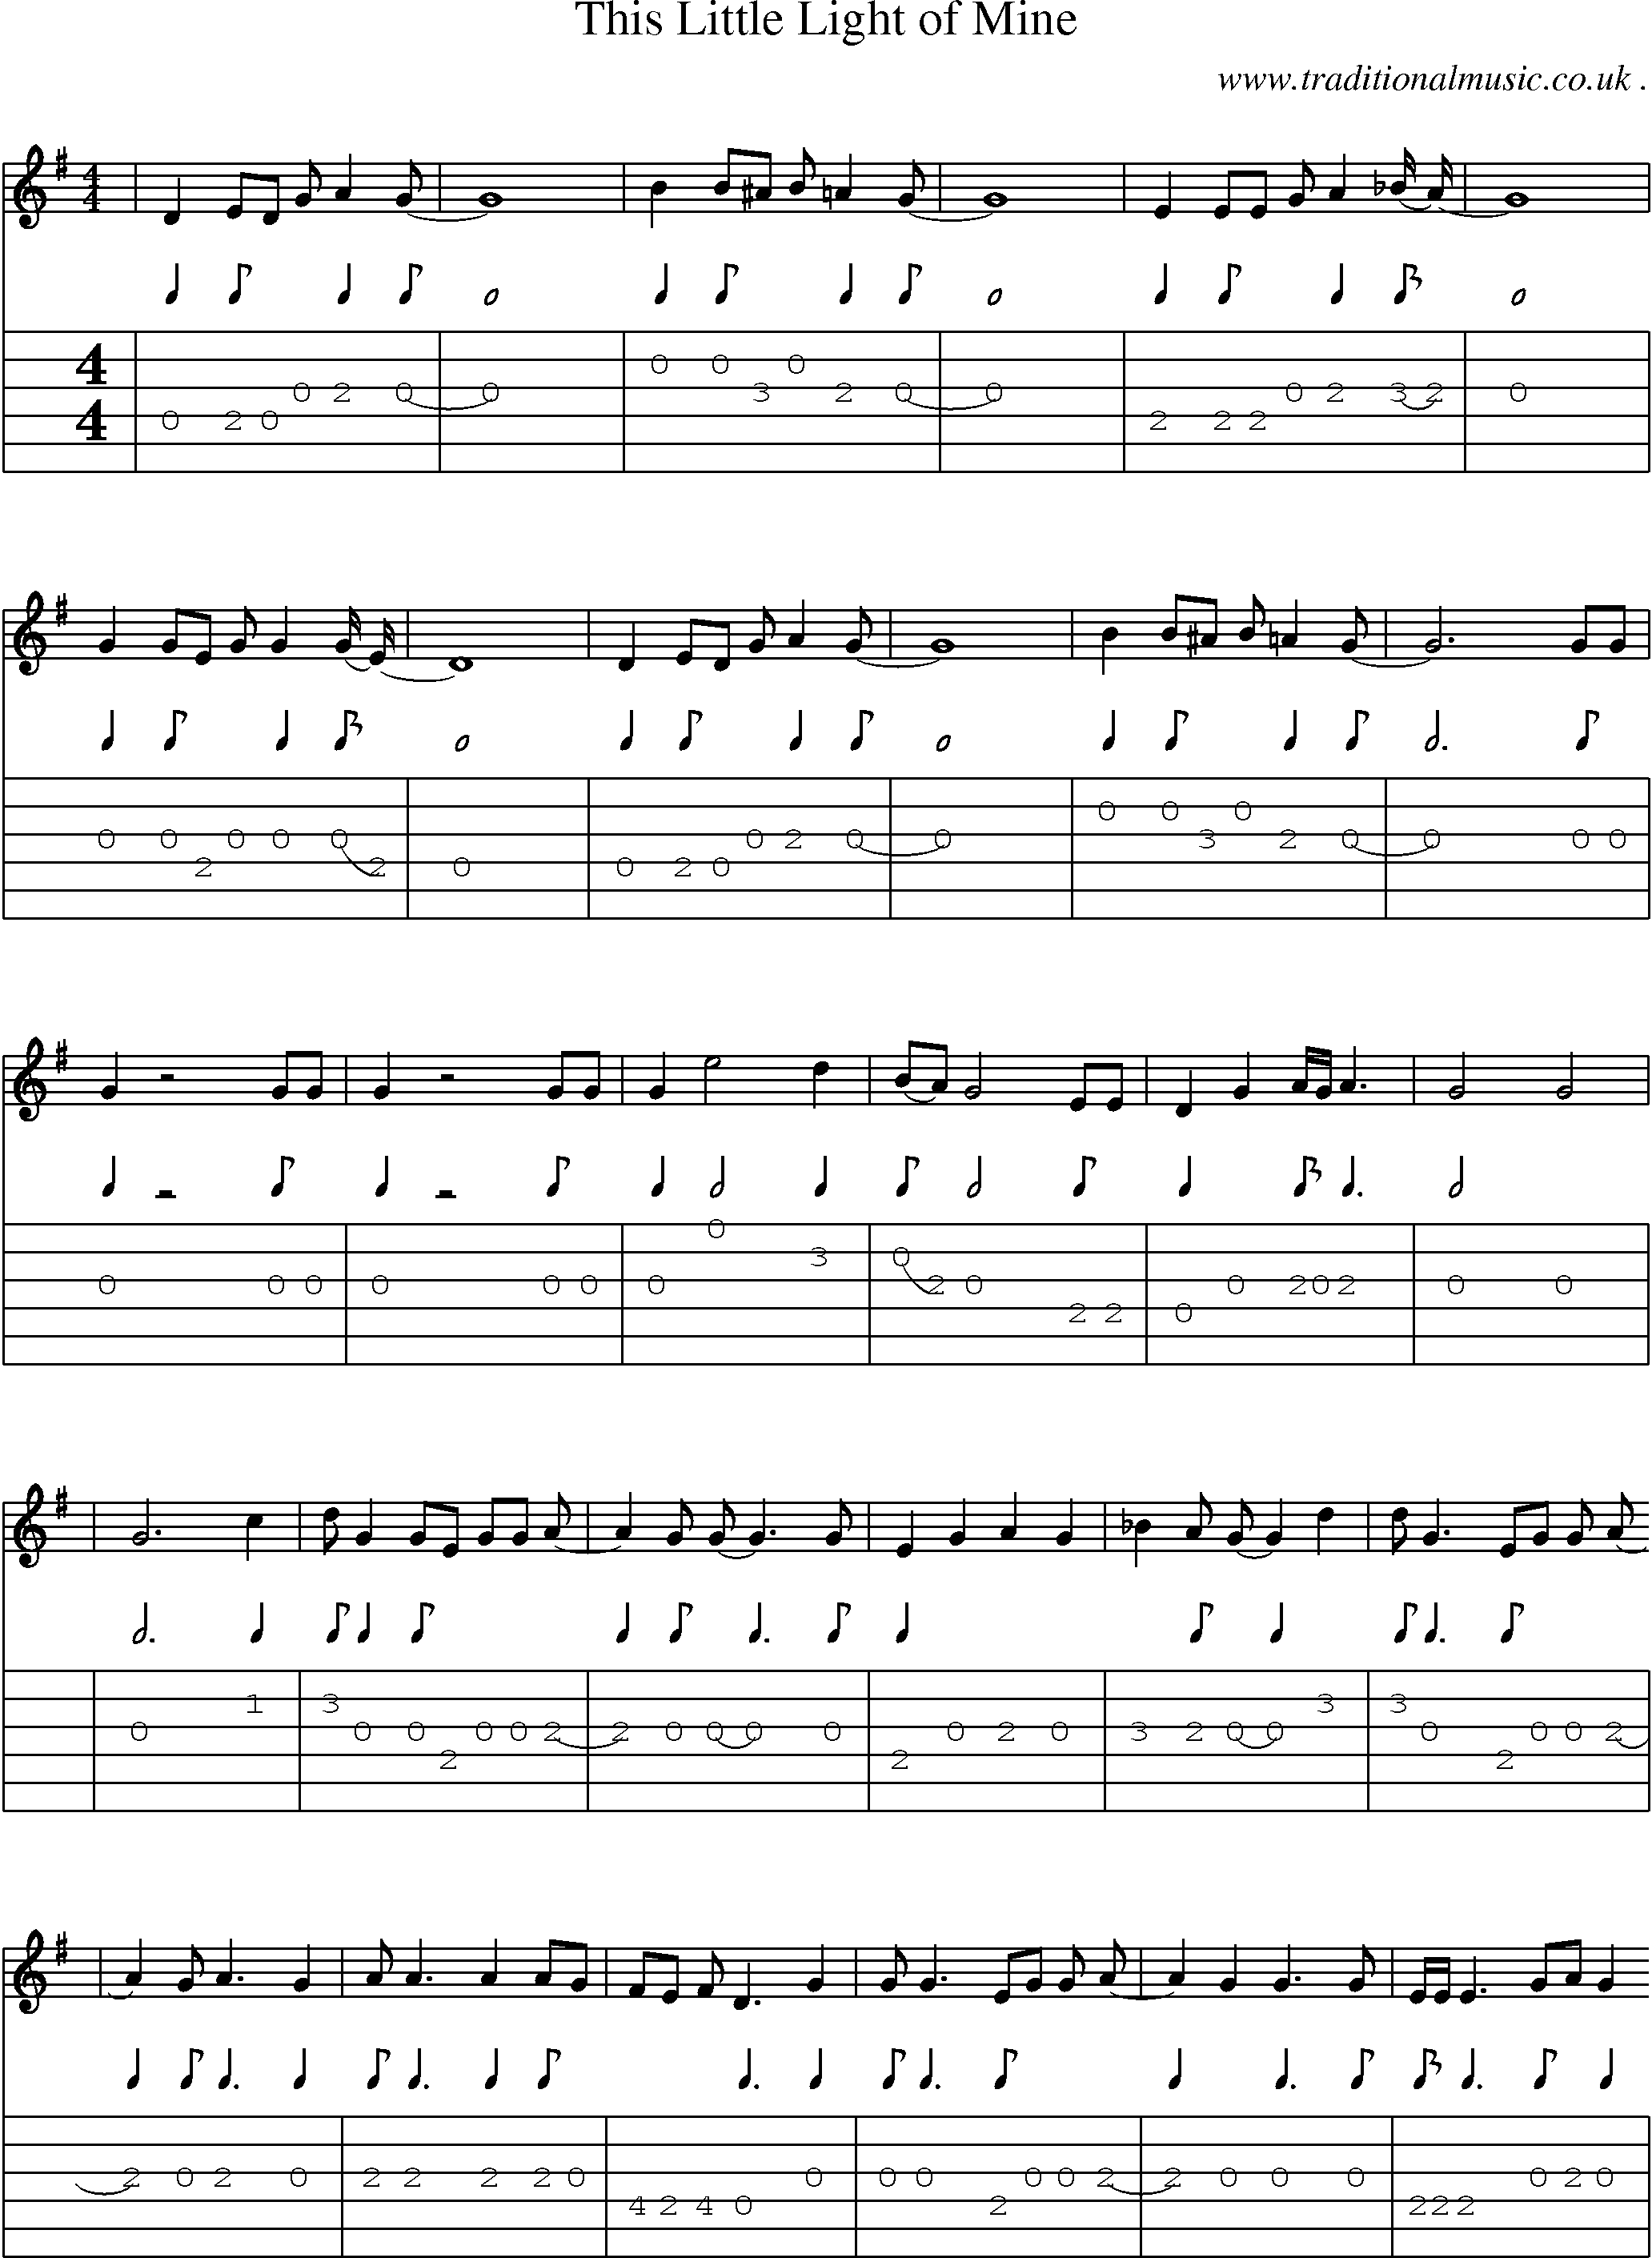 Music Score and Guitar Tabs for This Little Light Of Mine